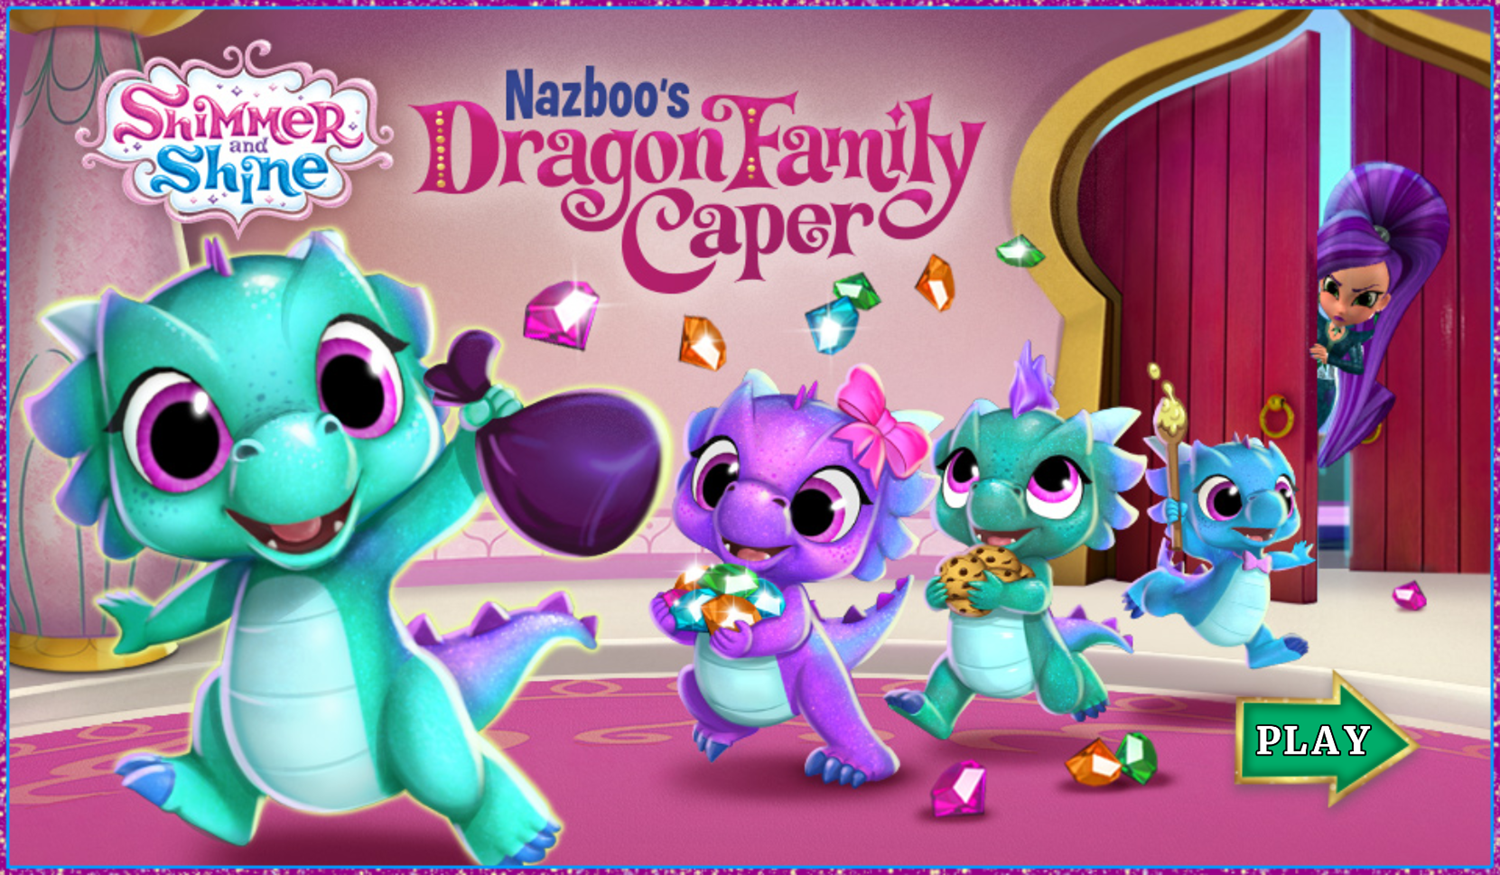 Shimmer and Shine Nazboo's Family Dragon Caper Game Welcome Screen Screenshot.